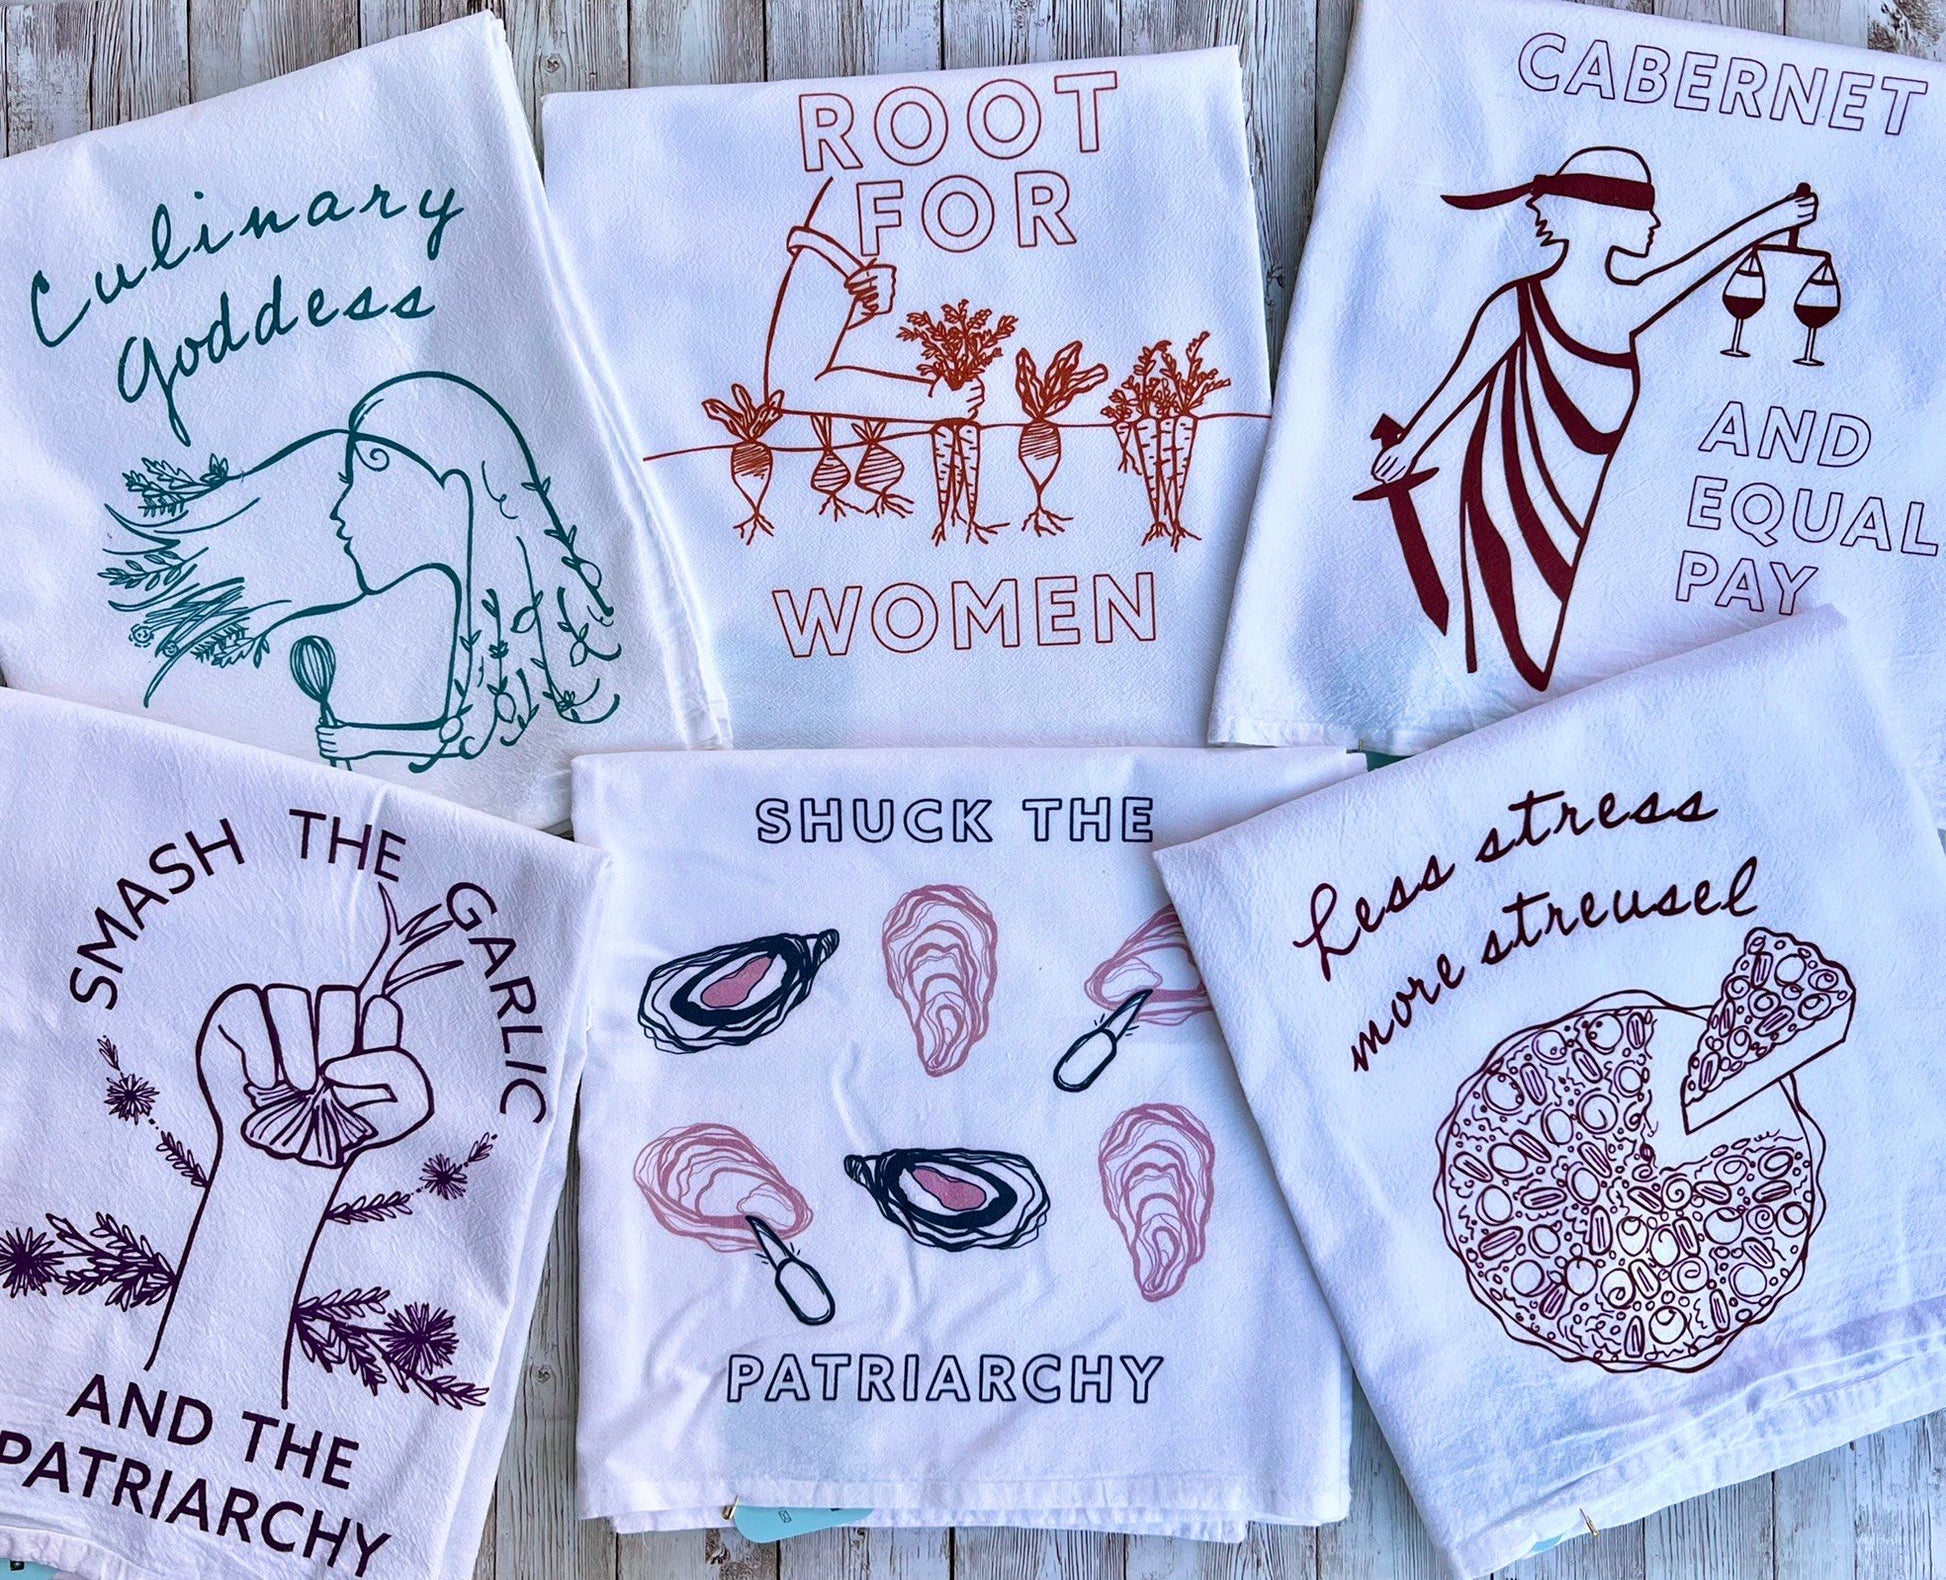 A collection of tea towels with various phrases